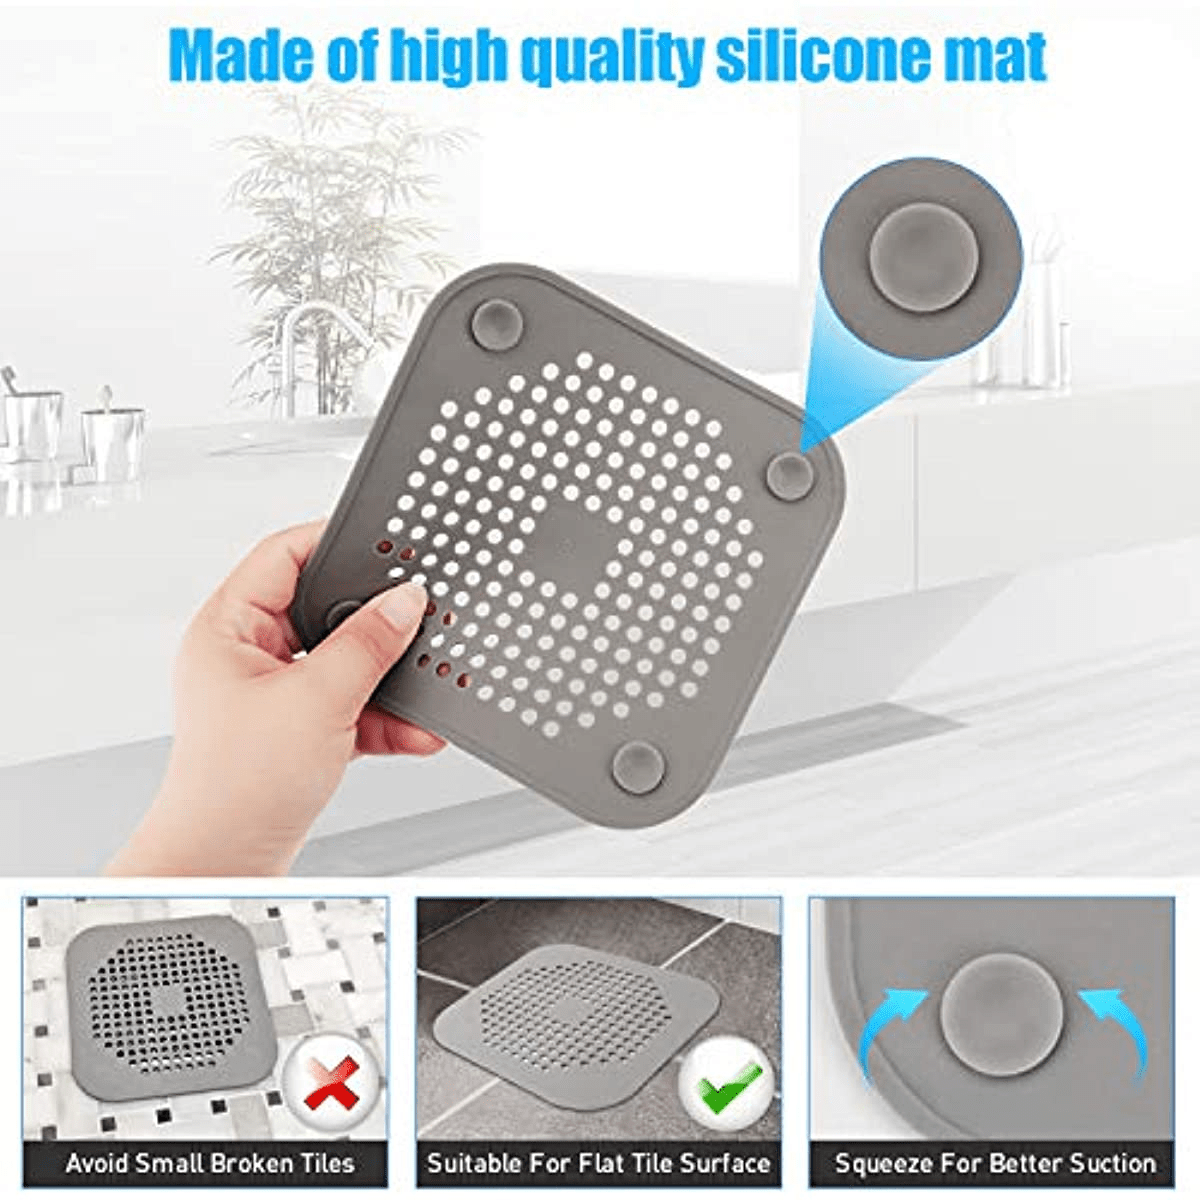 Drain Clean Cover White,Square Drain Shower Cover, Silicone Hair Stopper  with Suction Cup,Easy to Install and Clean Great for Hair Loss, Suitable  for